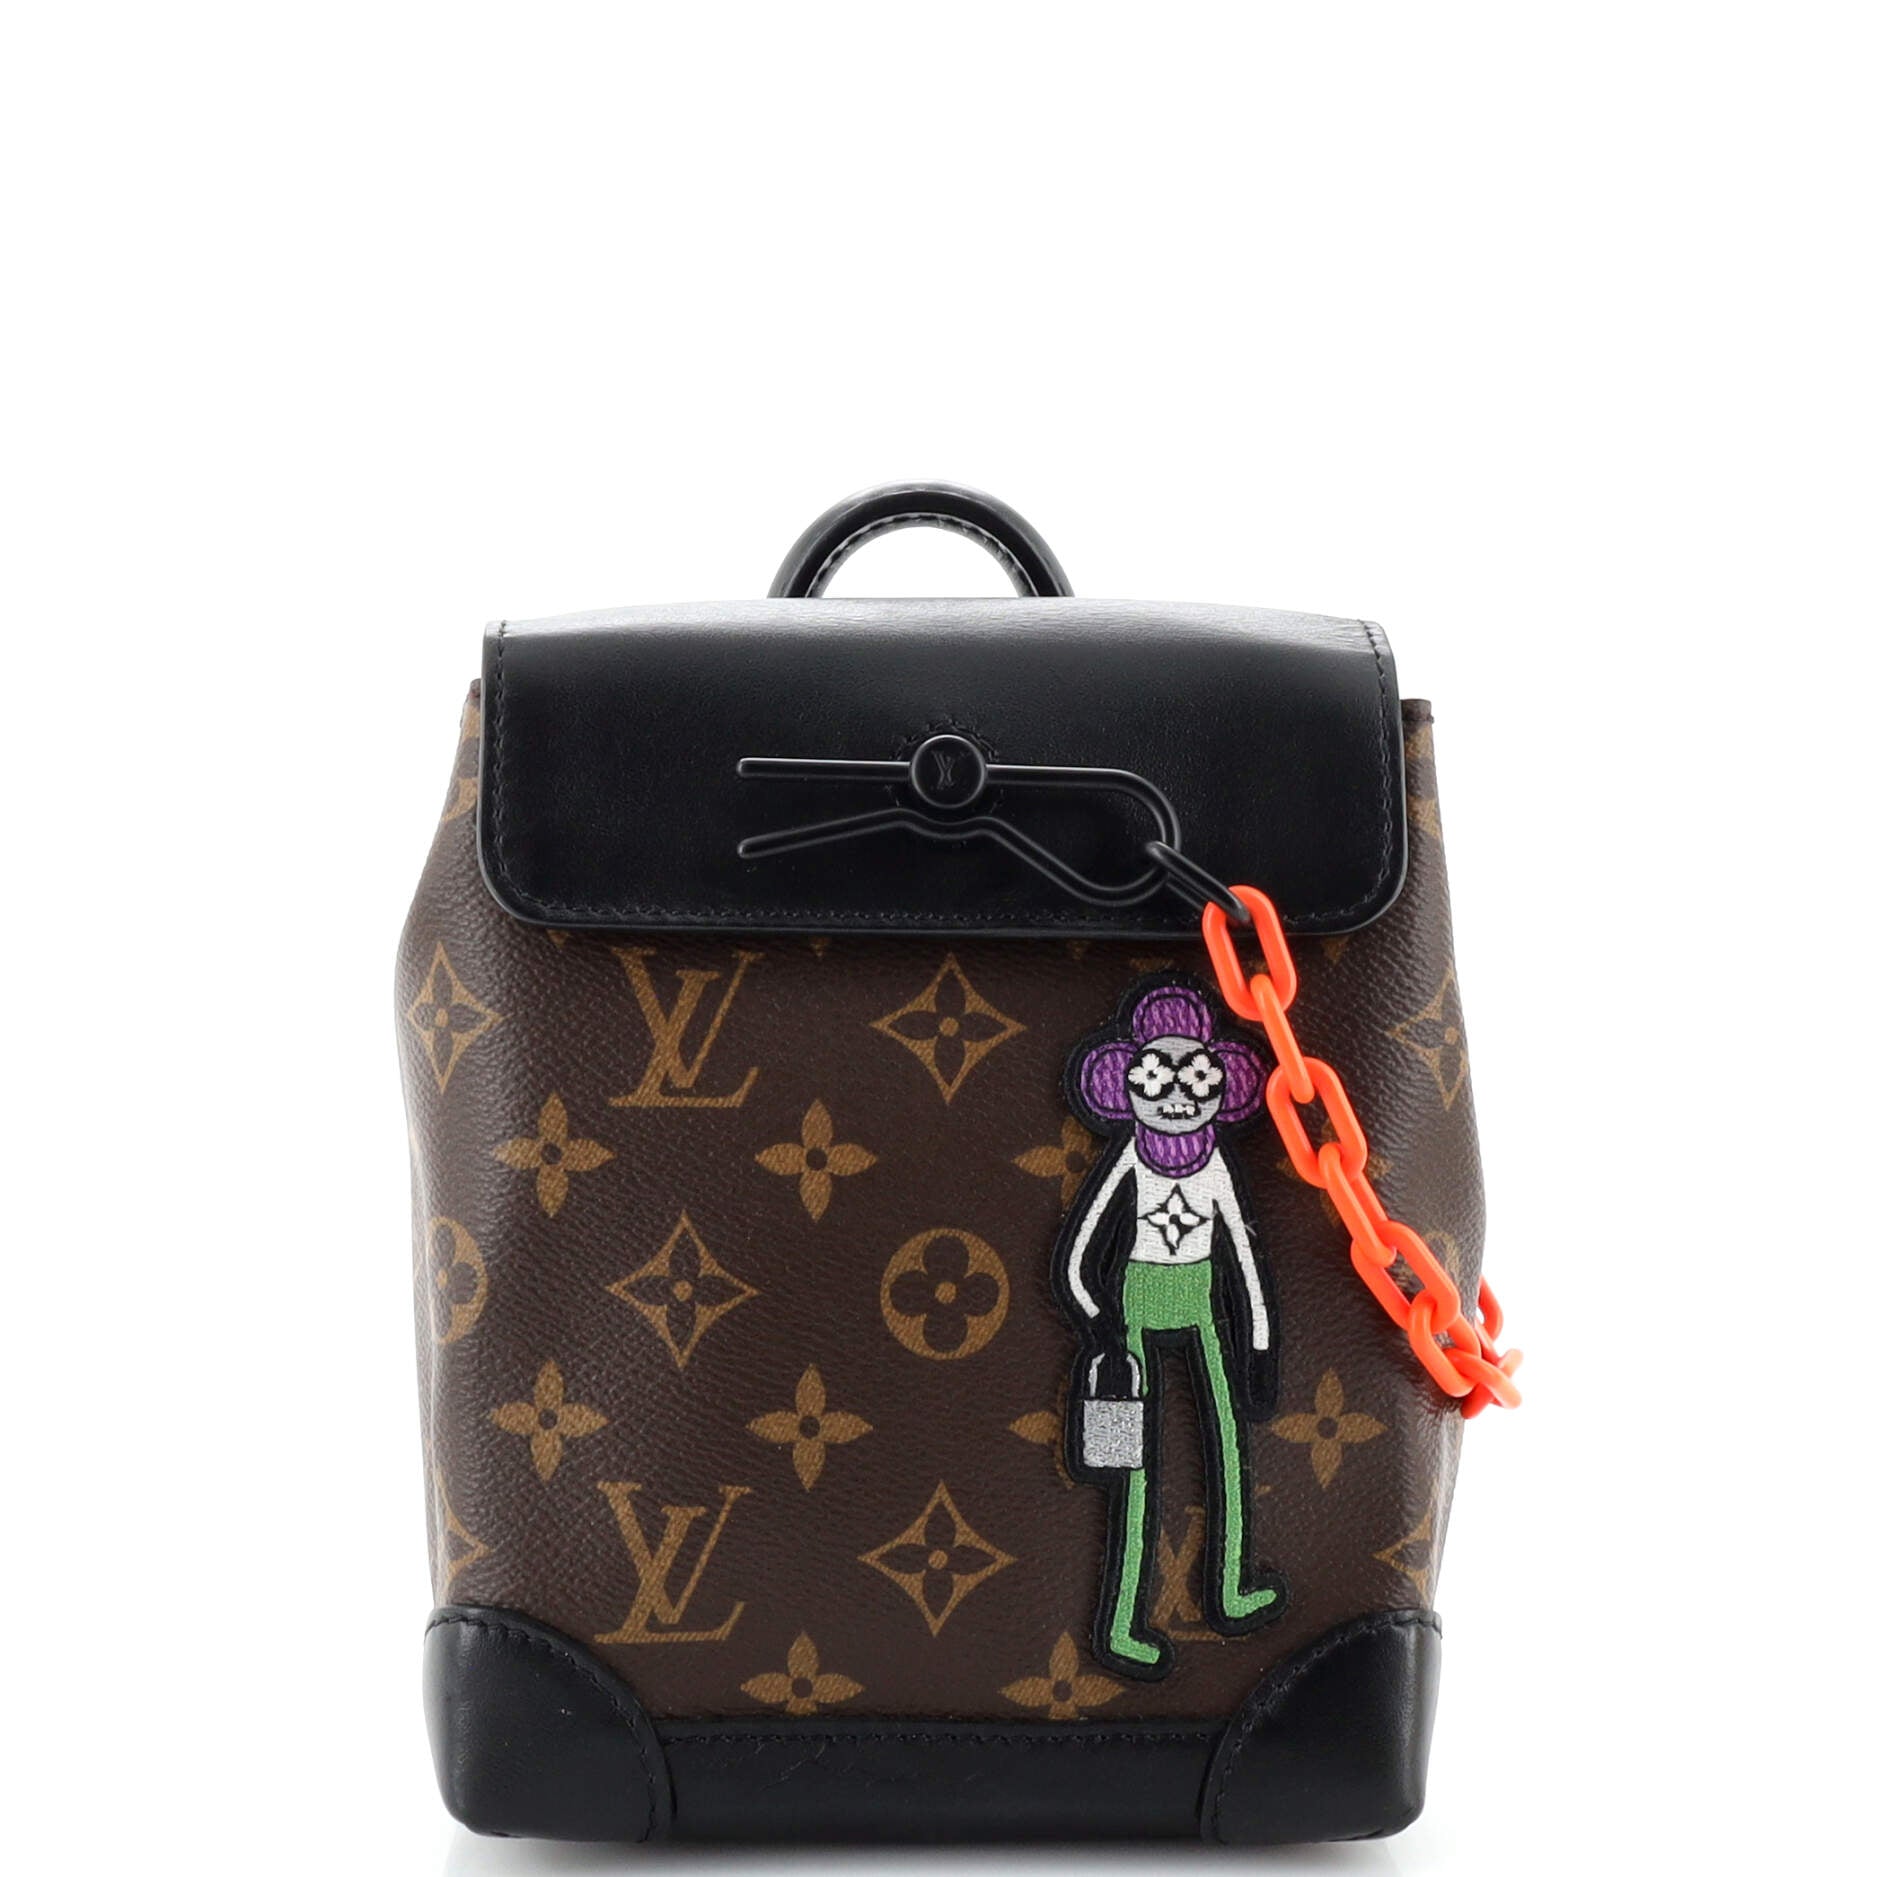 Steamer Bag Monogram Canvas with LV Friends Patch XS